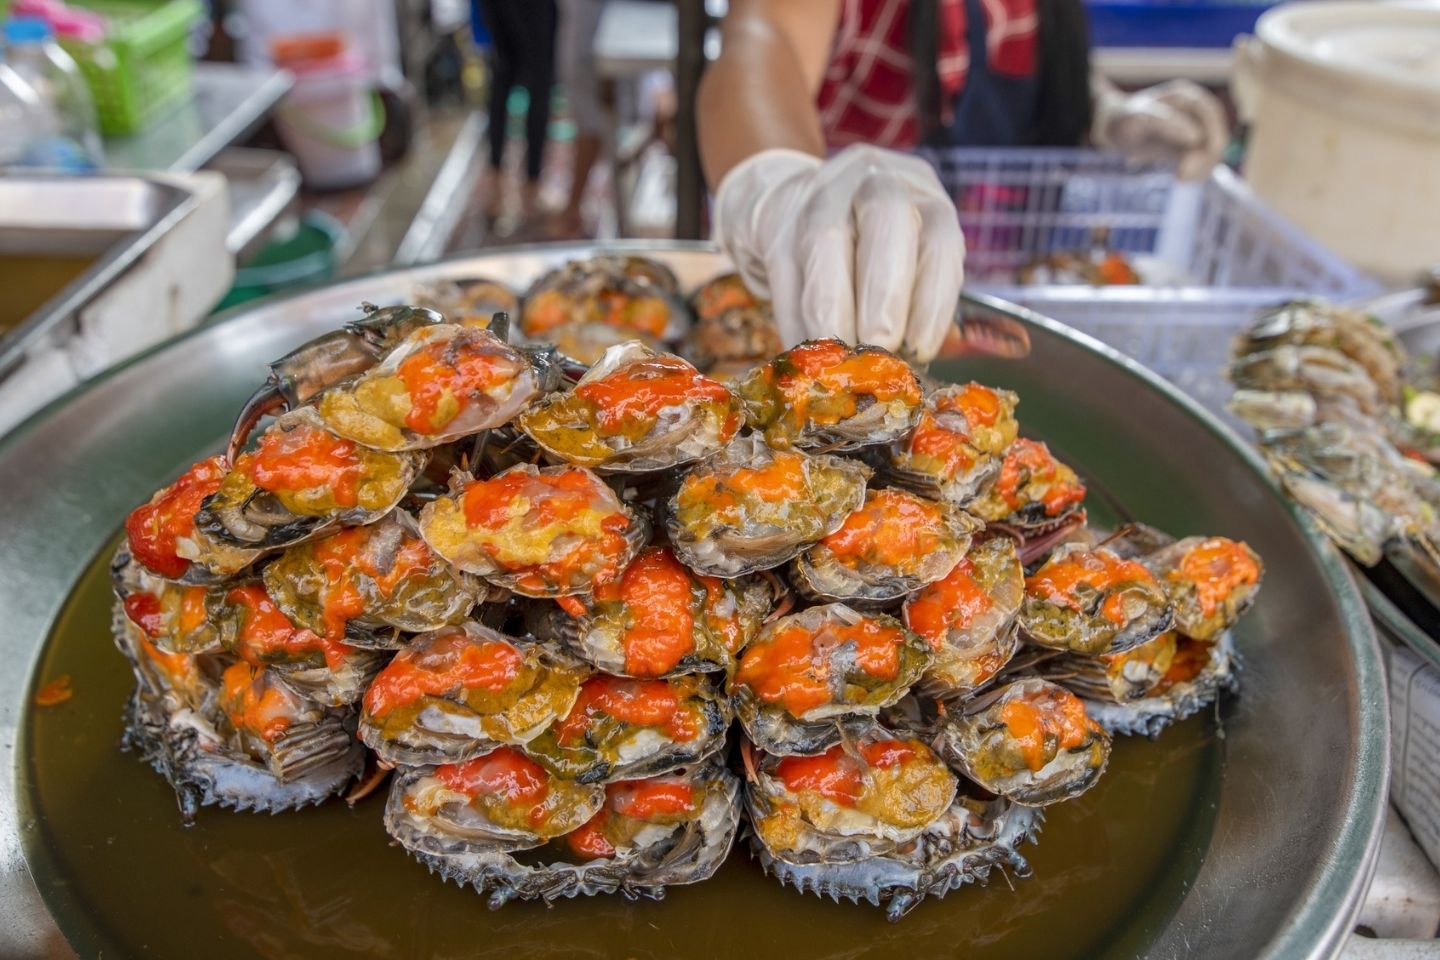 What To Expect At The 11th Annual South Beach Seafood Festival